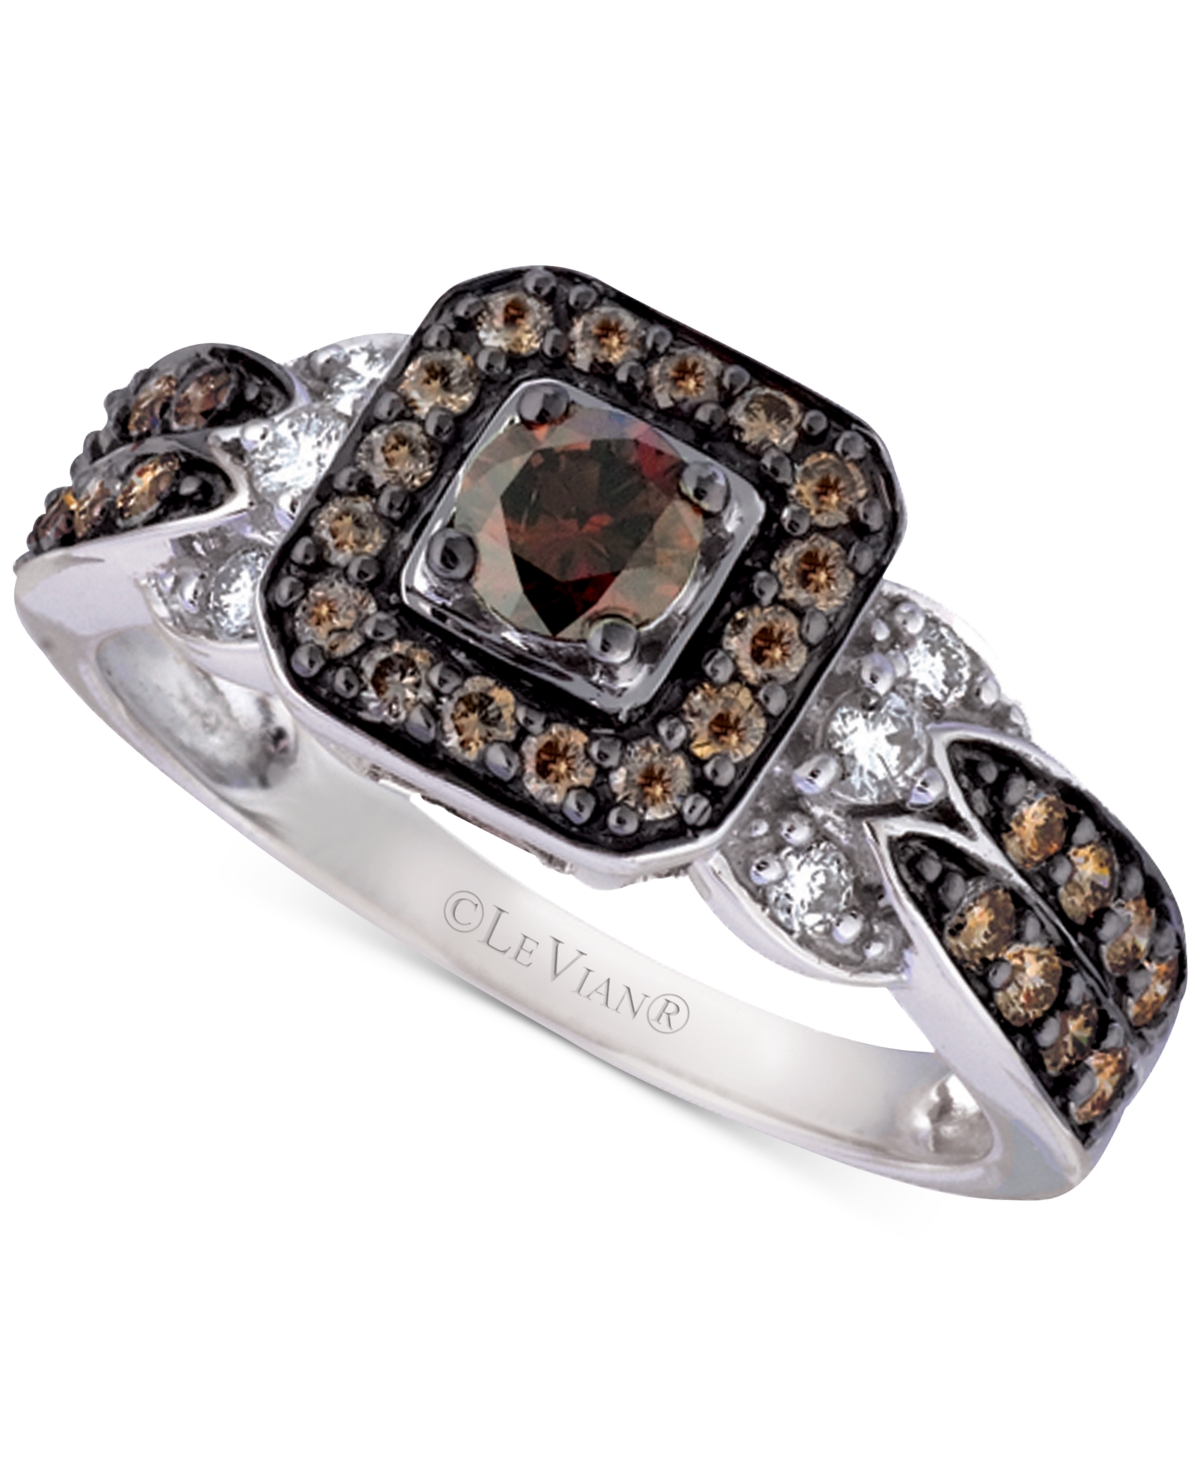 Le Vian Chocolate and Vanilla Diamond Ring (3/4 ct. .) in 14k White Gold  & Reviews - Rings - Jewelry & Watches - Macy's